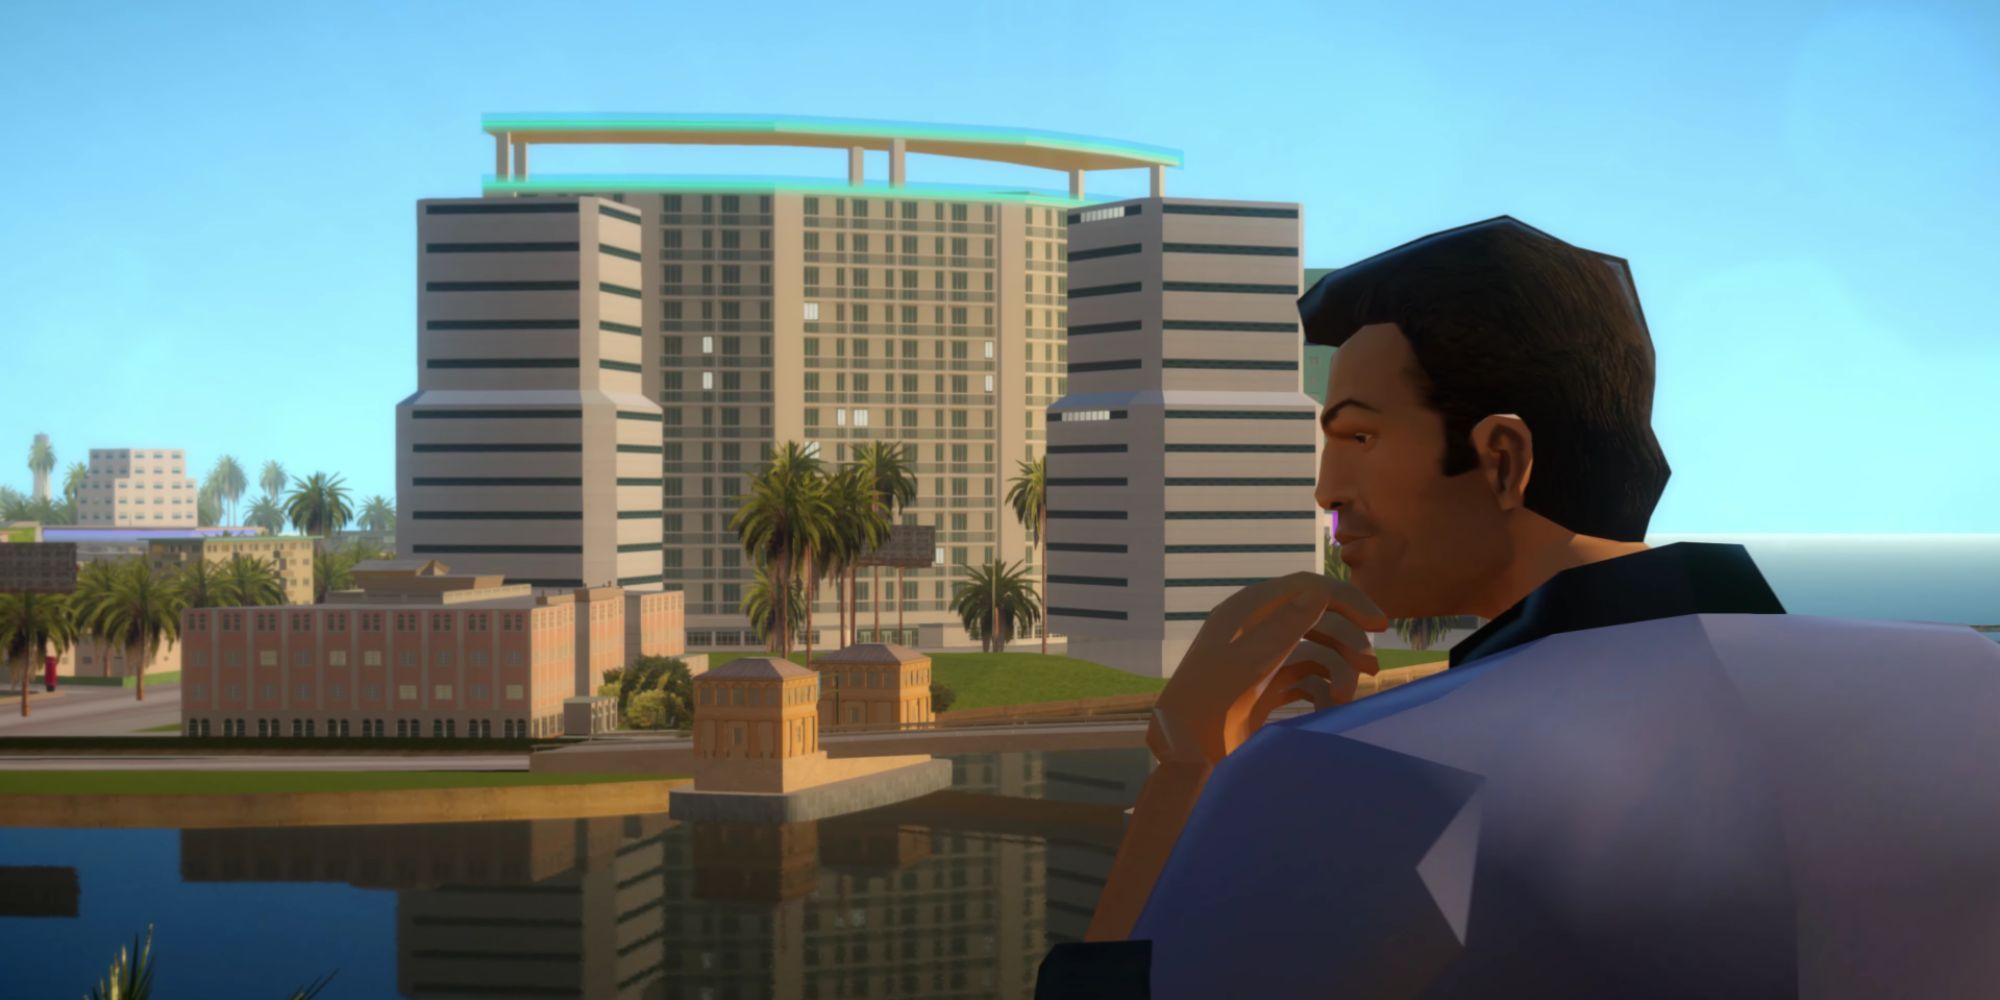 A next-gen remake of Vice City from some GTA modders.